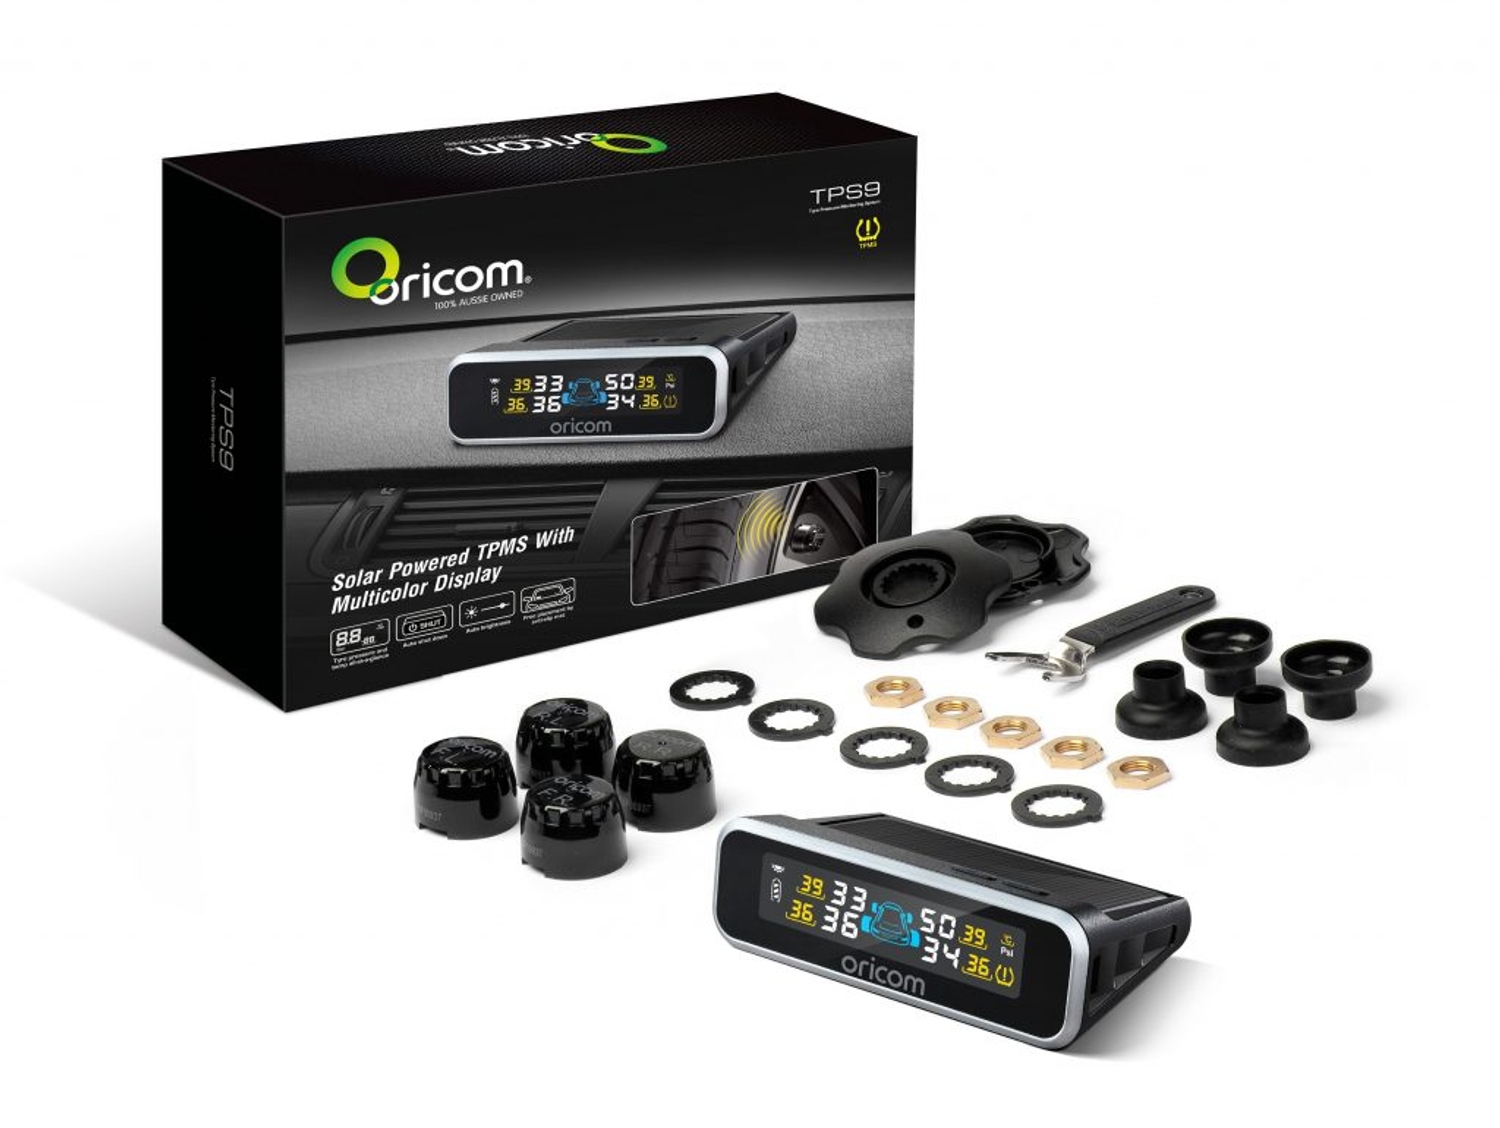 TPMS - Tyre Pressure Monitoring Systems Explained - Oricom